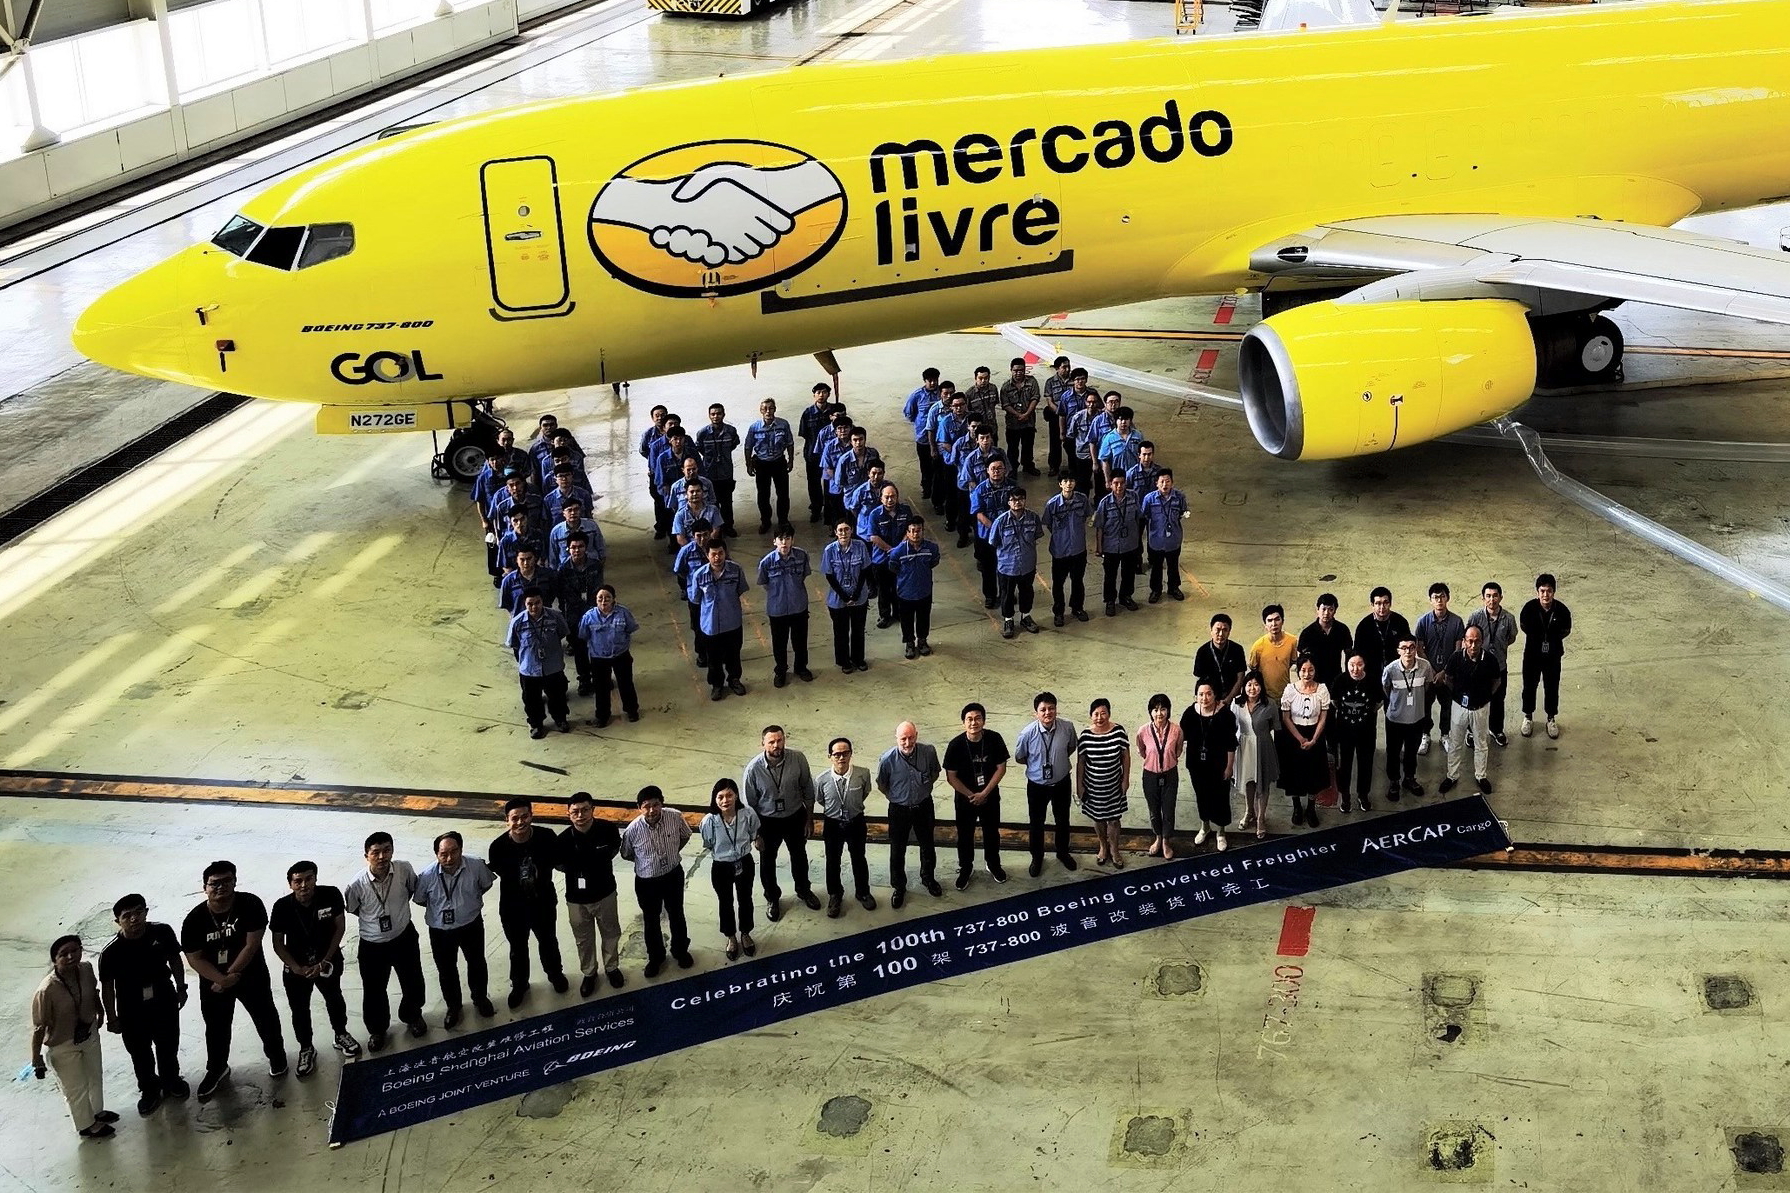 AerCap Cargo has leased the aircraft to GOL who will operate the freighter for Mercado Livre. Click to enlarge.